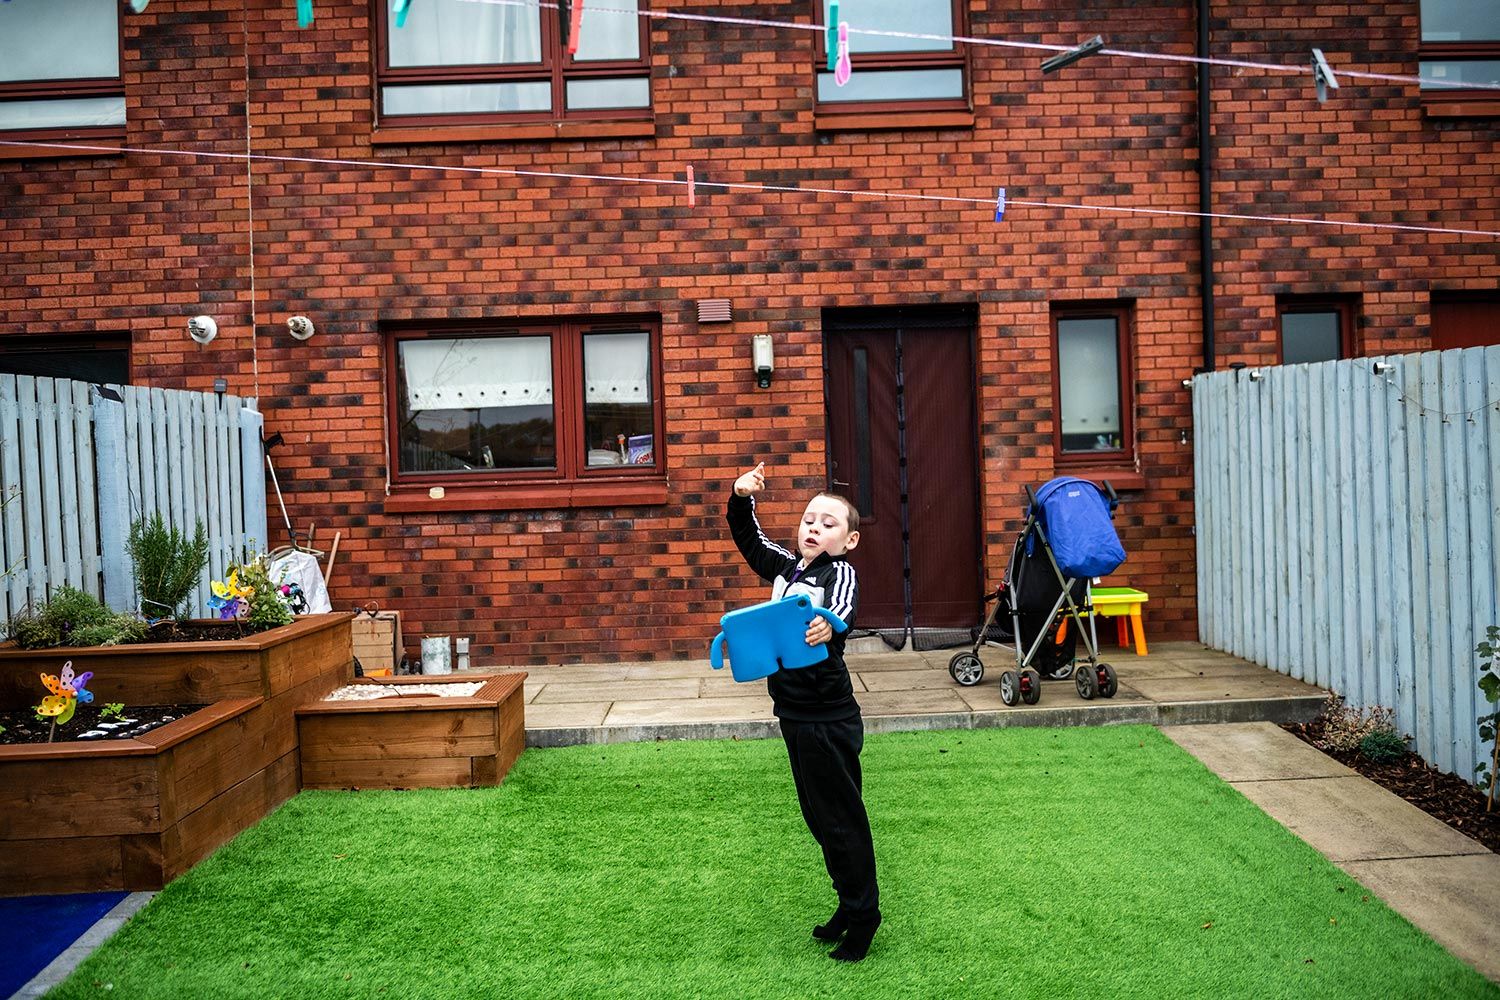 David Crichton plays on his iPad in the backyard of his home, where he has a sensory garden, in Possilpark. Image by Michael Santiago. United Kingdom, 2019.